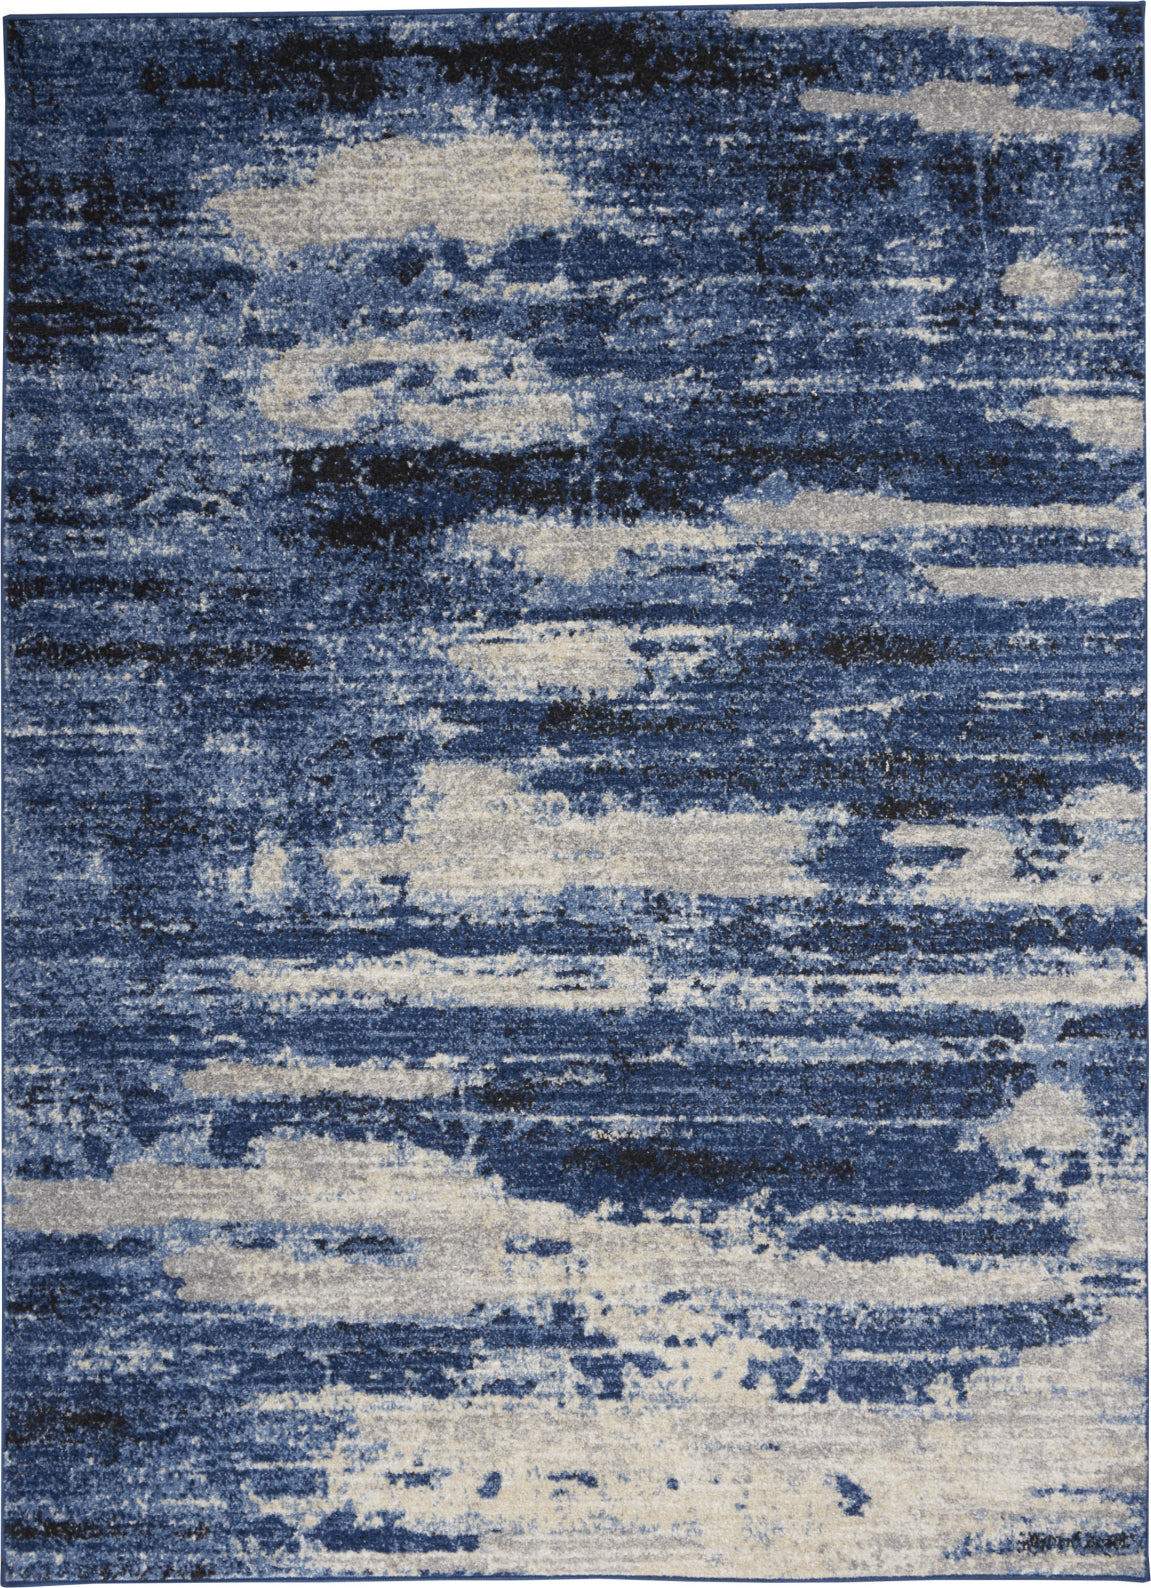 and Rugs Rug Blue Area Incredible Teal/Ivory – River RFV02 Flow Calvin Decor CK001 Klein